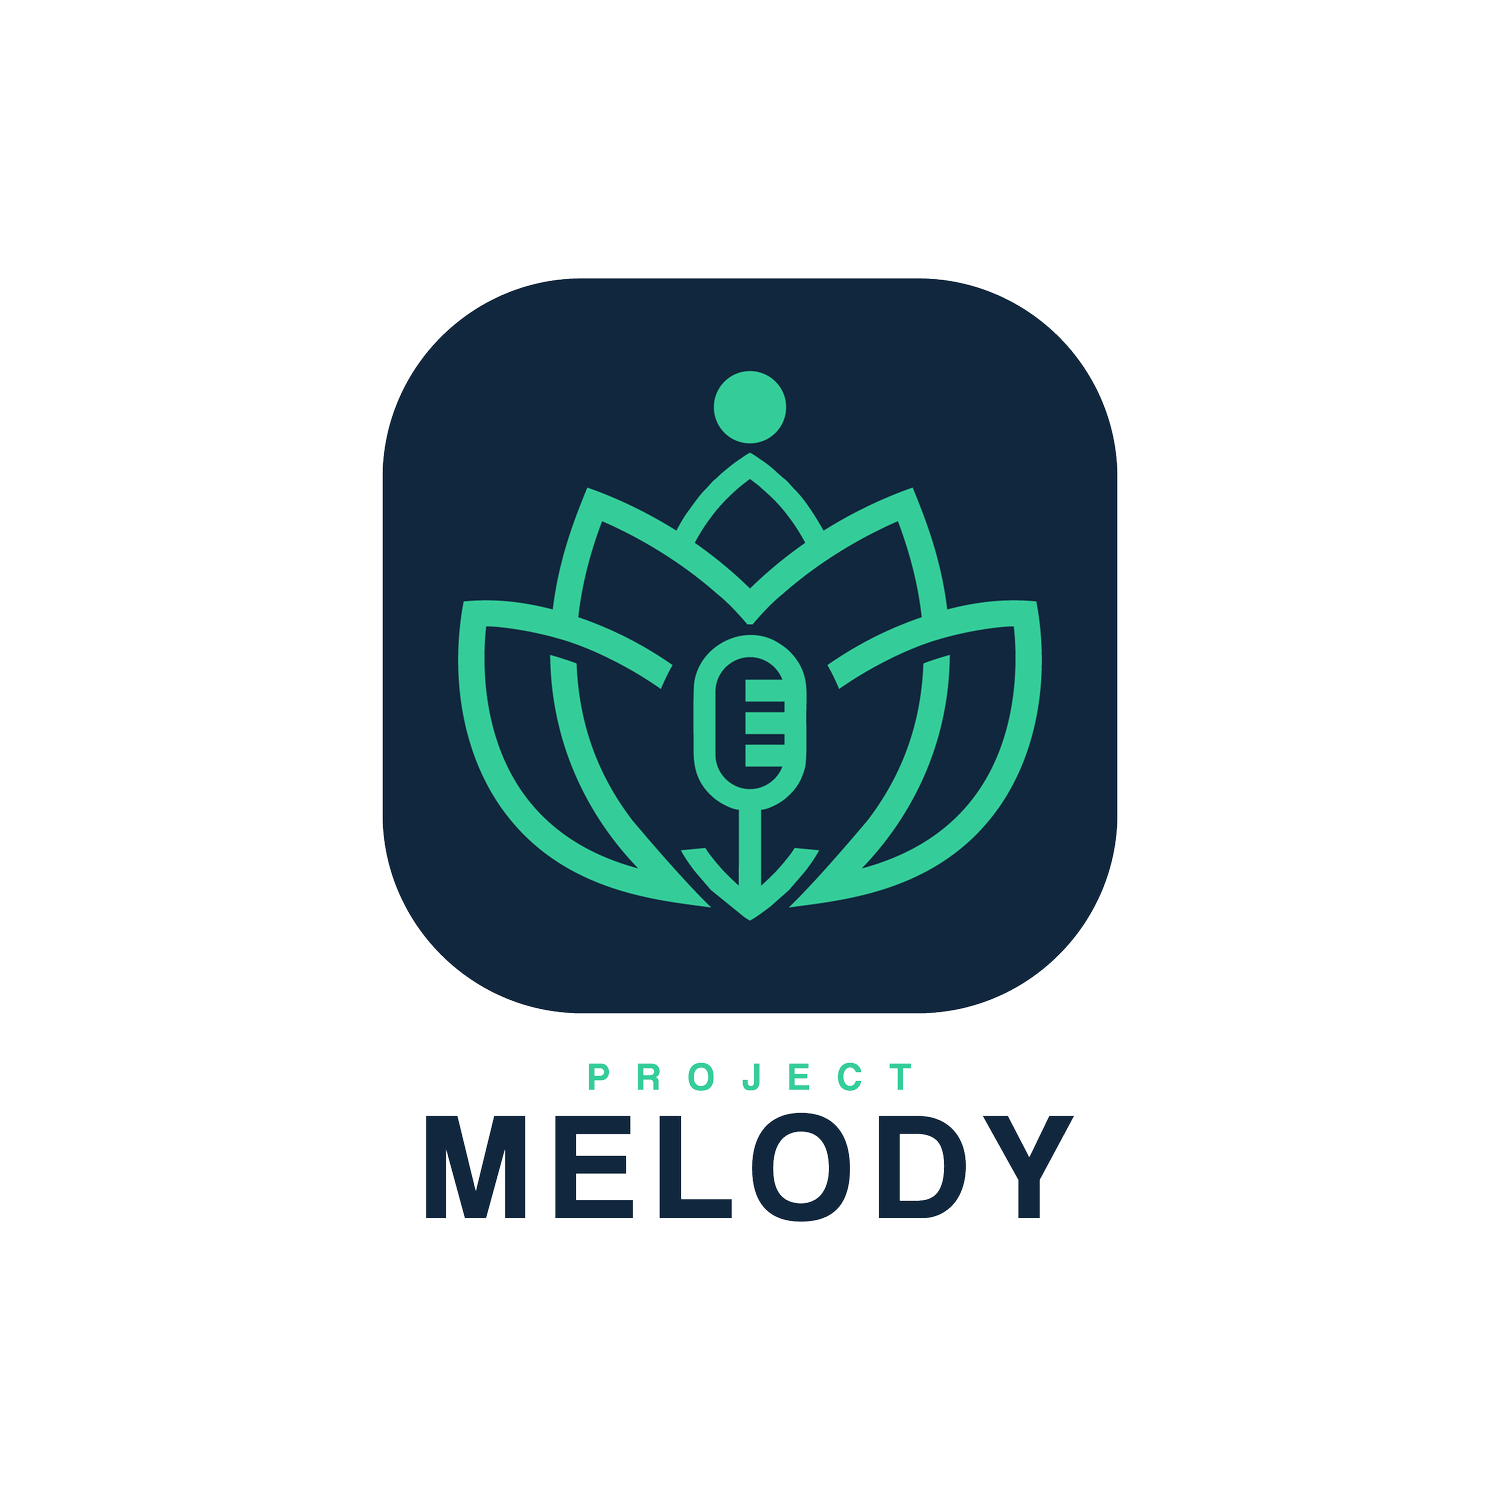 Project MELODY